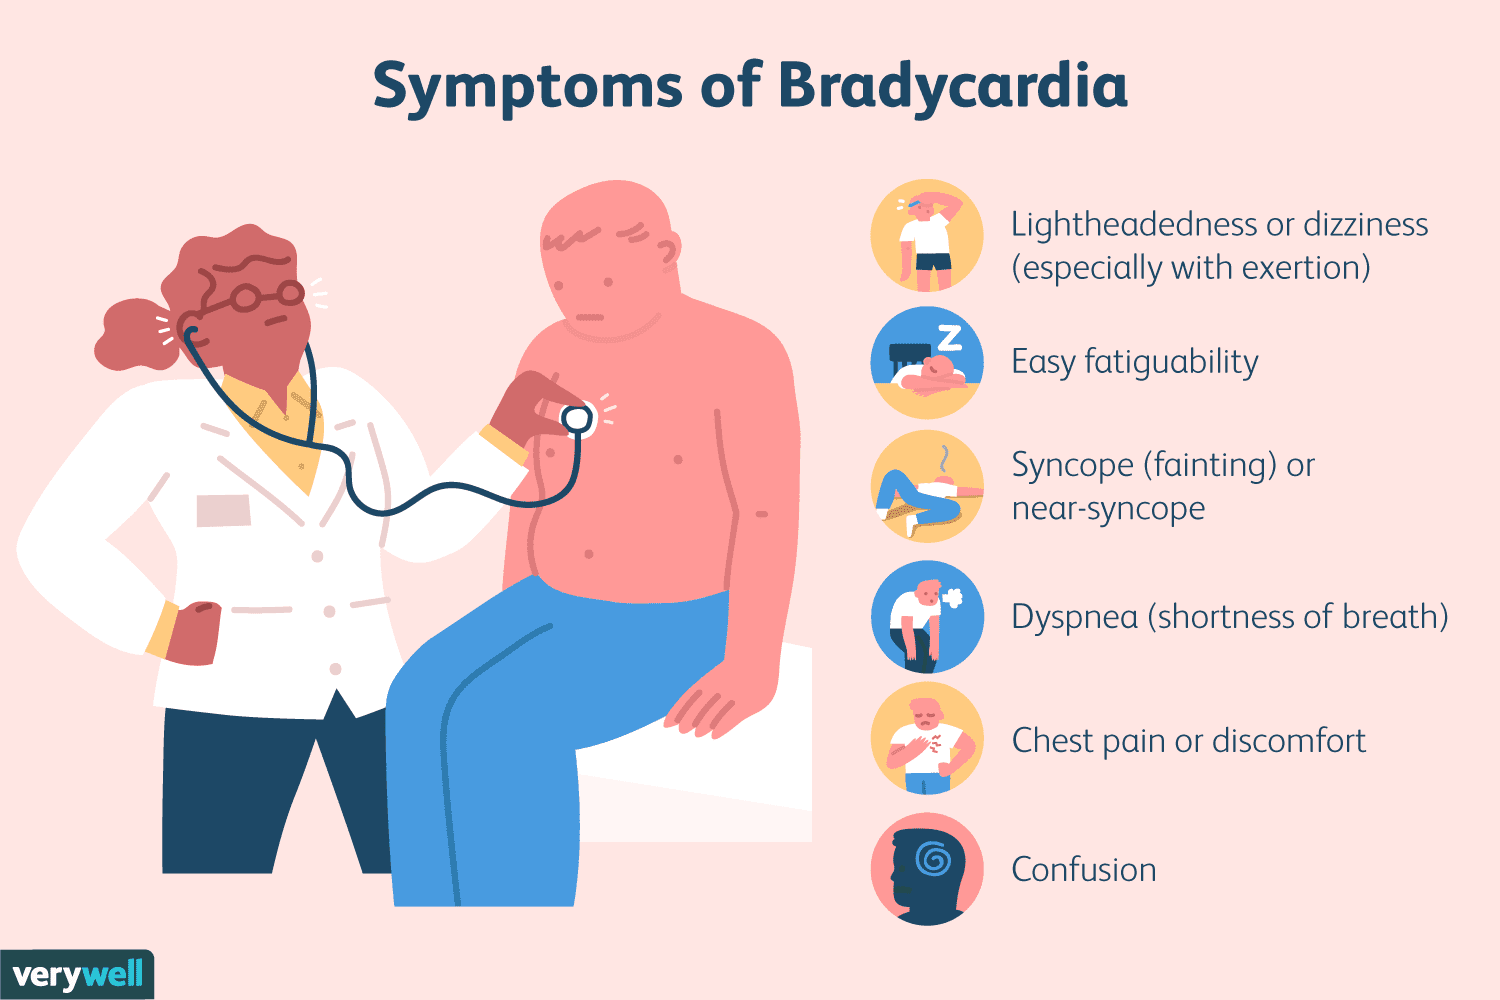 Bradycardia: When Is a Slow Heart Rate a Problem?